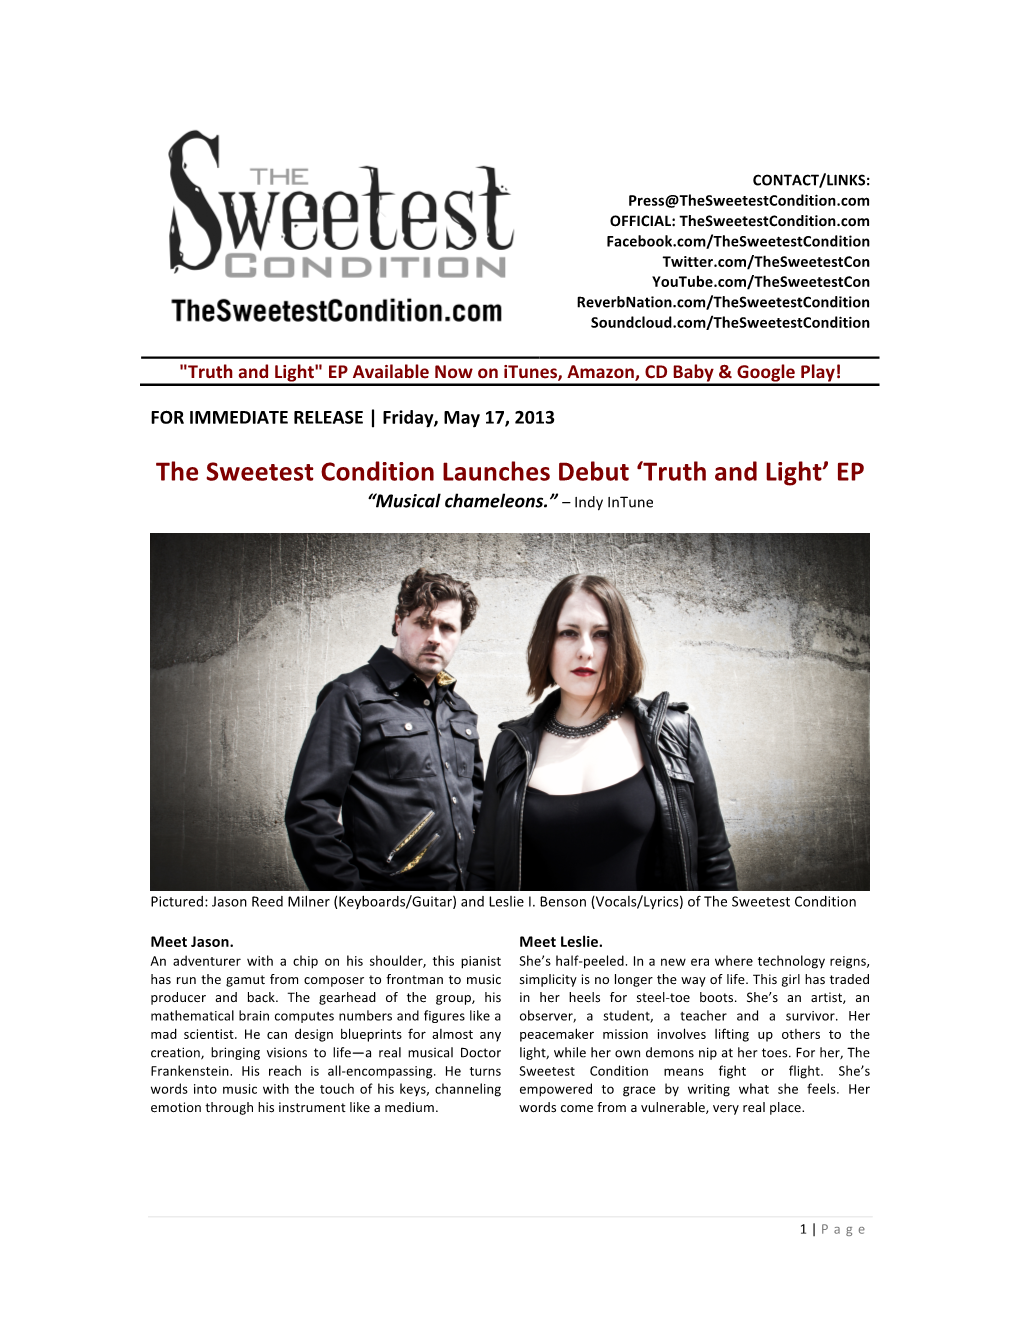 The Sweetest Condition Launches Debut 'Truth and Light' EP